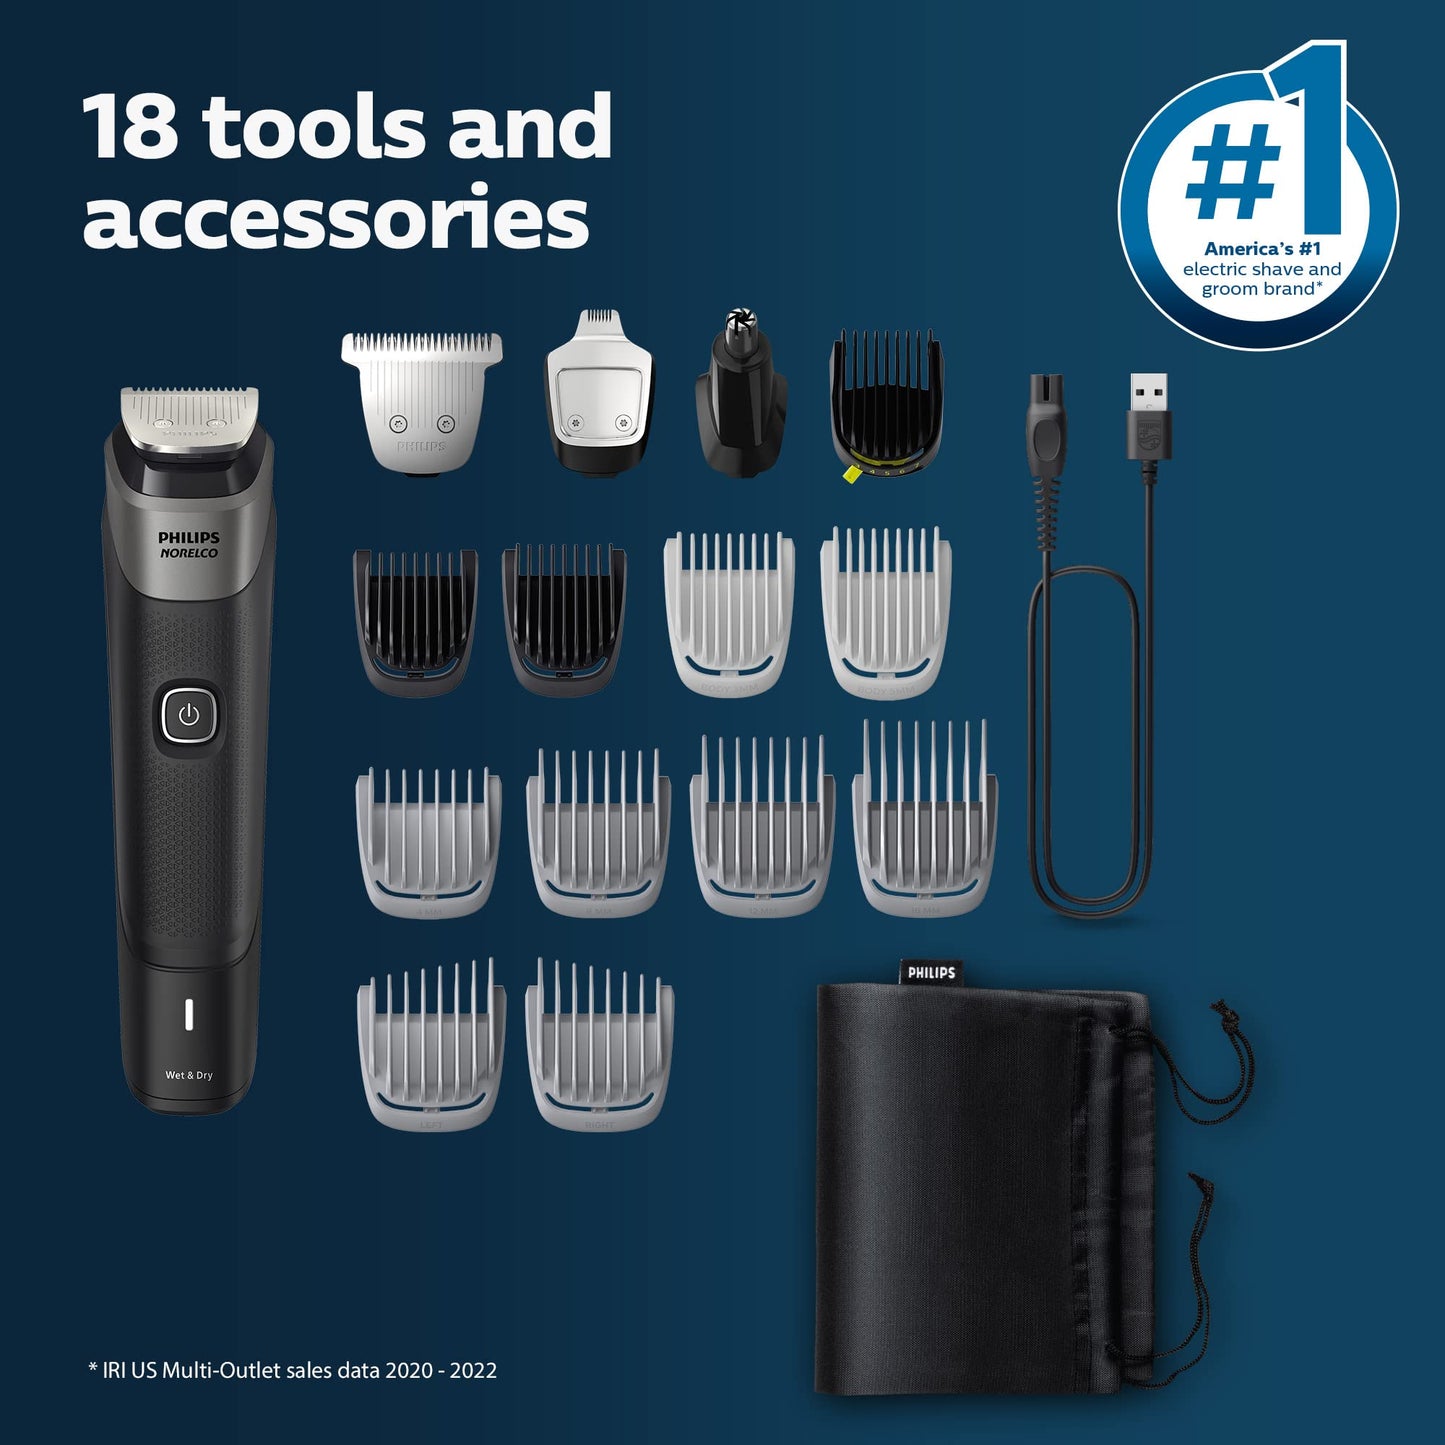 Philips Norelco Multigroom Series 5000 18 Piece, Beard Face, Hair, Body and Intimate Hair Trimmer for Men - NO BLADE OIL MG5910/49